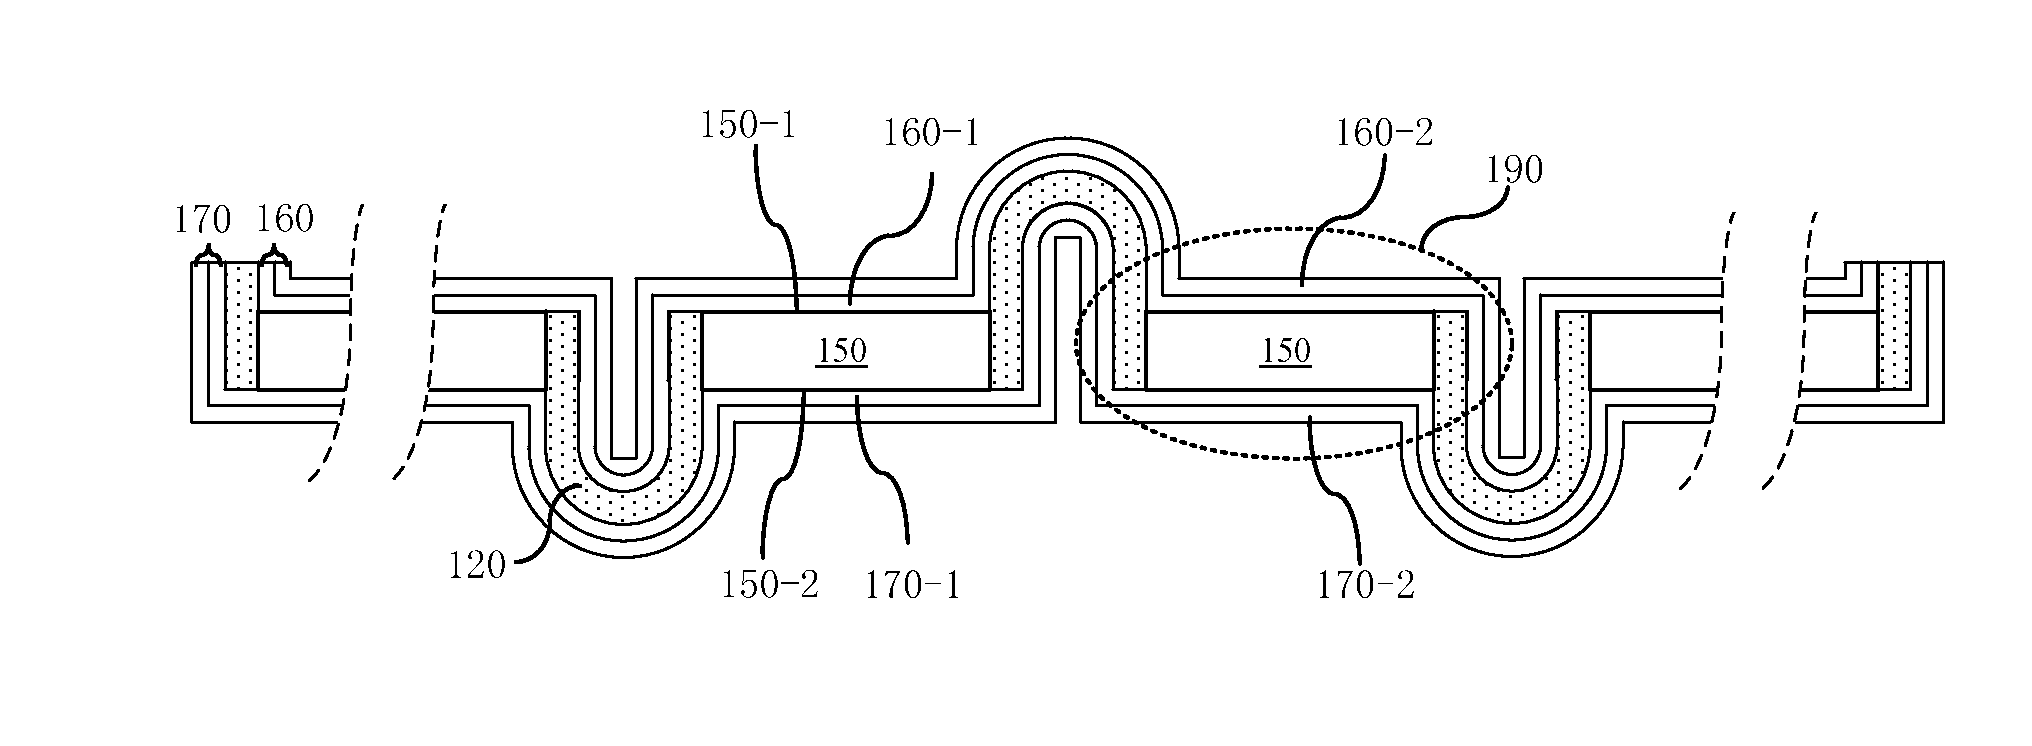 Substrate strip plate structure for semiconductor device and method for manufacturing the same